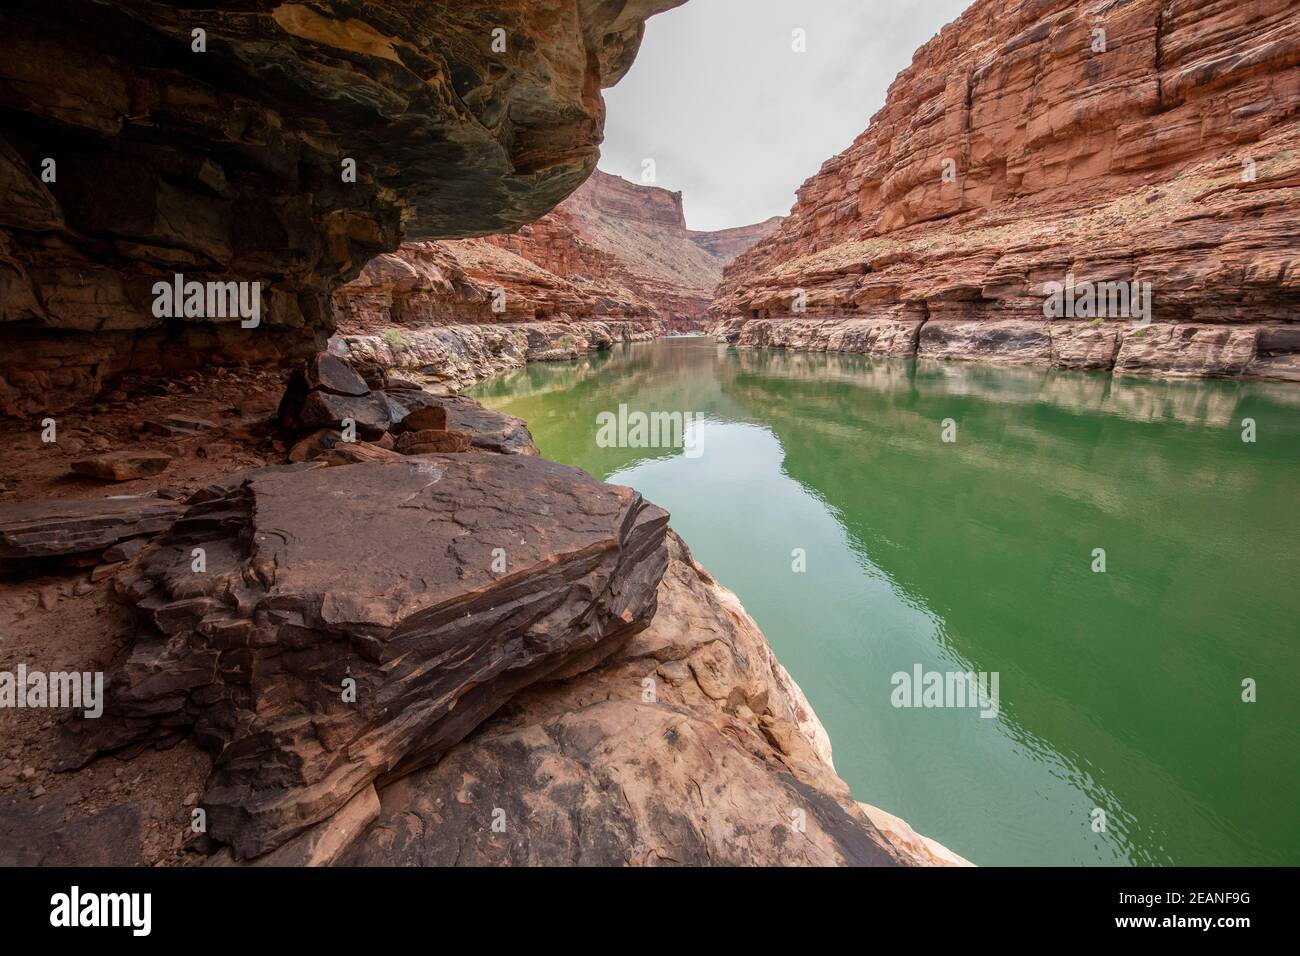 Marble Canyon along the Colorado River, Grand Canyon National Park, UNESCO World Heritage Site, Arizona, United States of America, North America Stock Photo